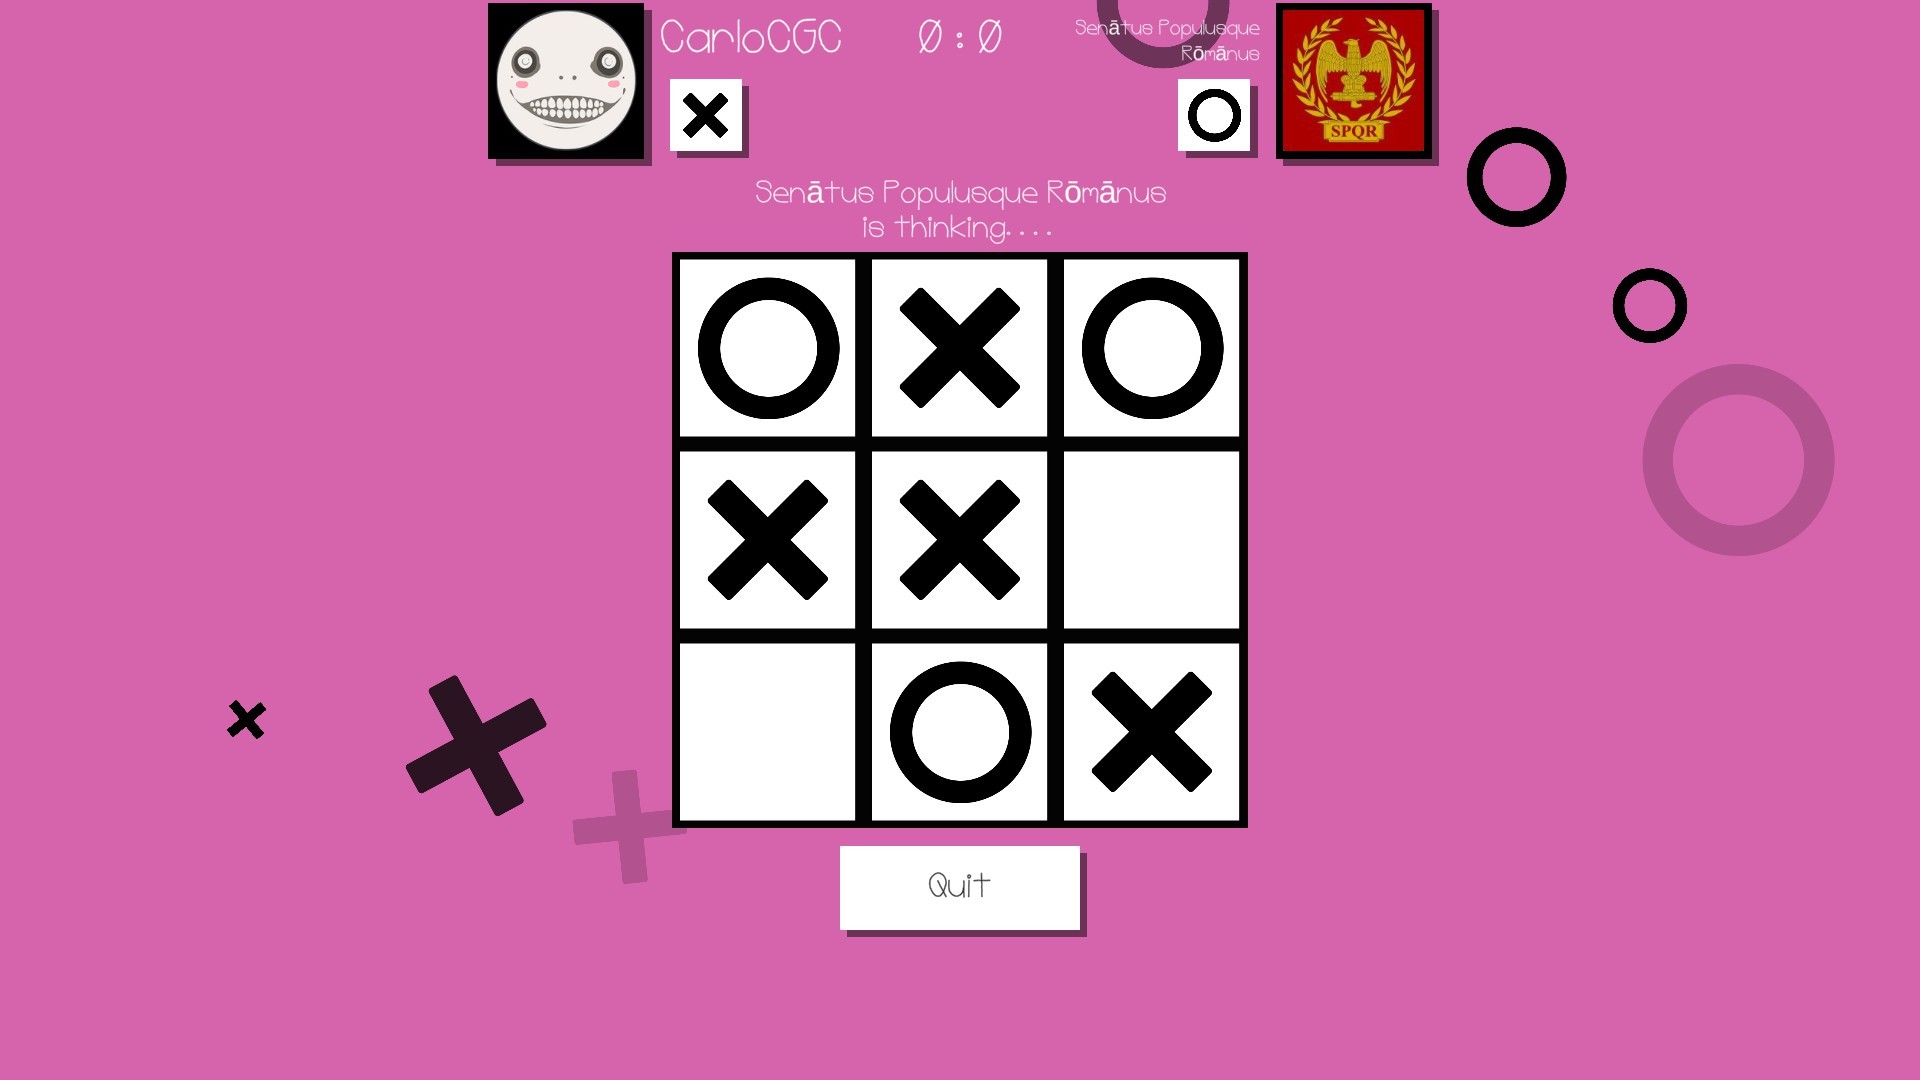 All For Nought - Tic Tac Toe on Steam